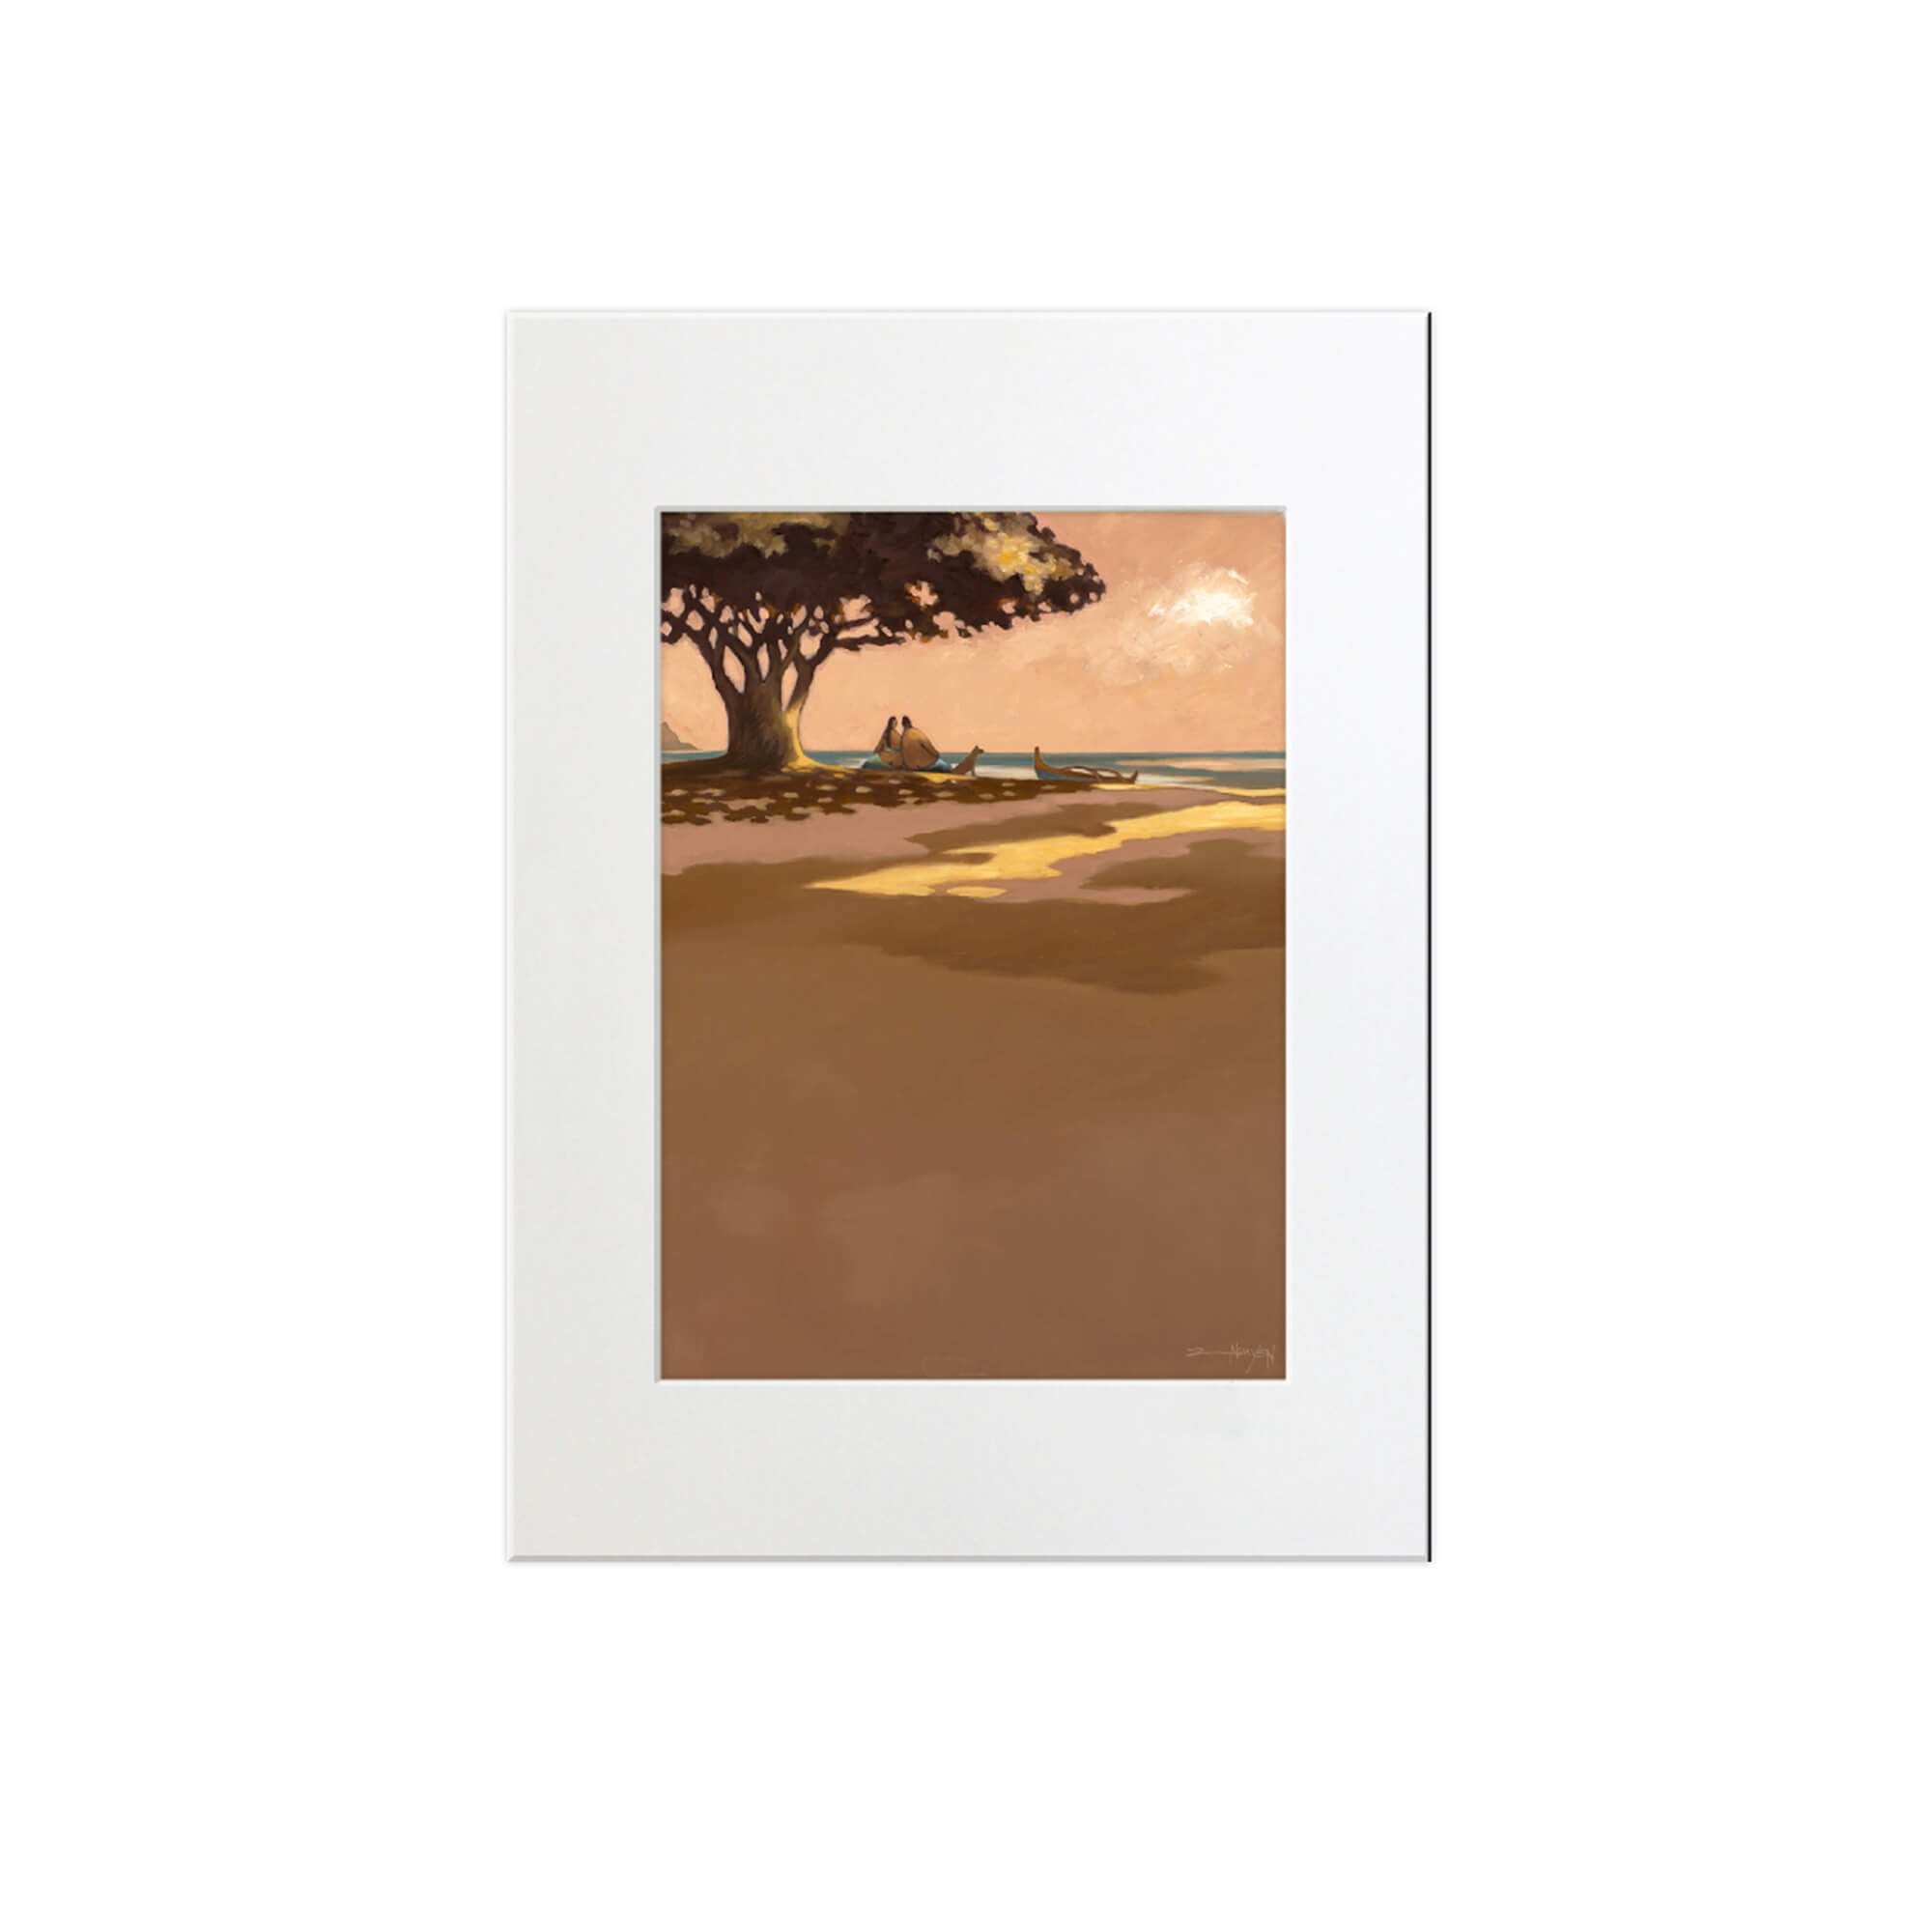 A matted art print of a couple and their dog enjoying a peaceful afternoon at the beach by Hawaii artist Tim Nguyen